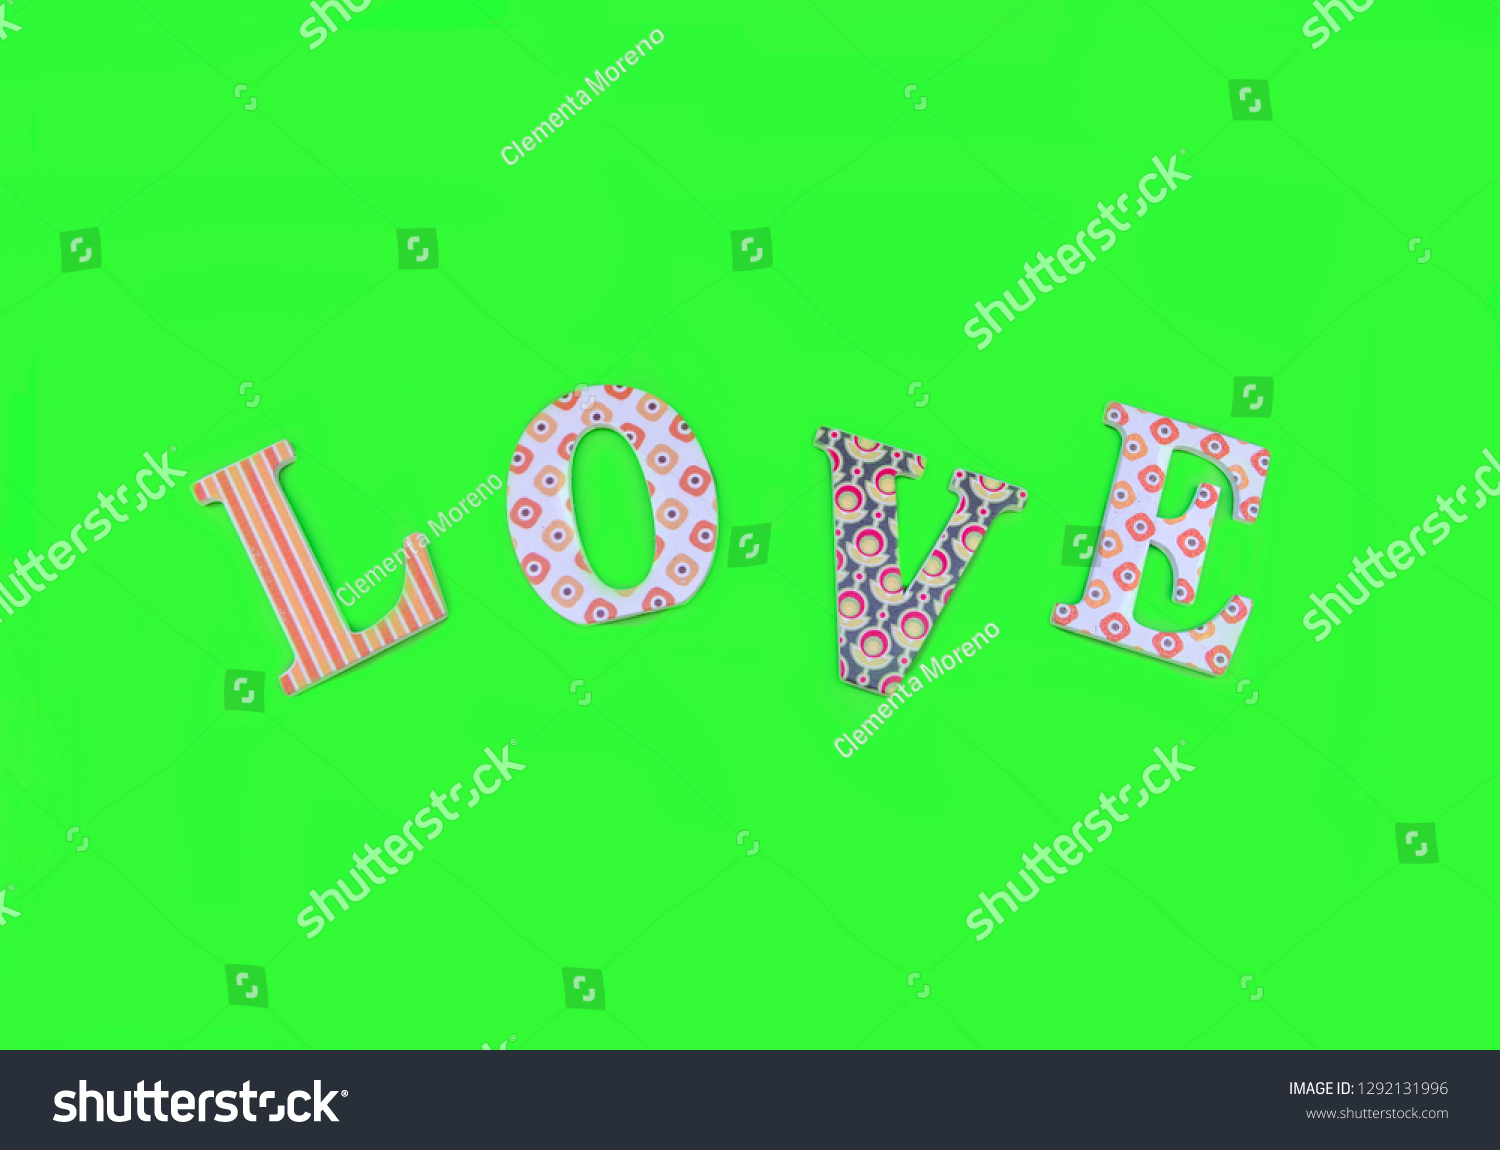 Vintage wooden love letters on green background with copy space. Romanticism concept. #1292131996